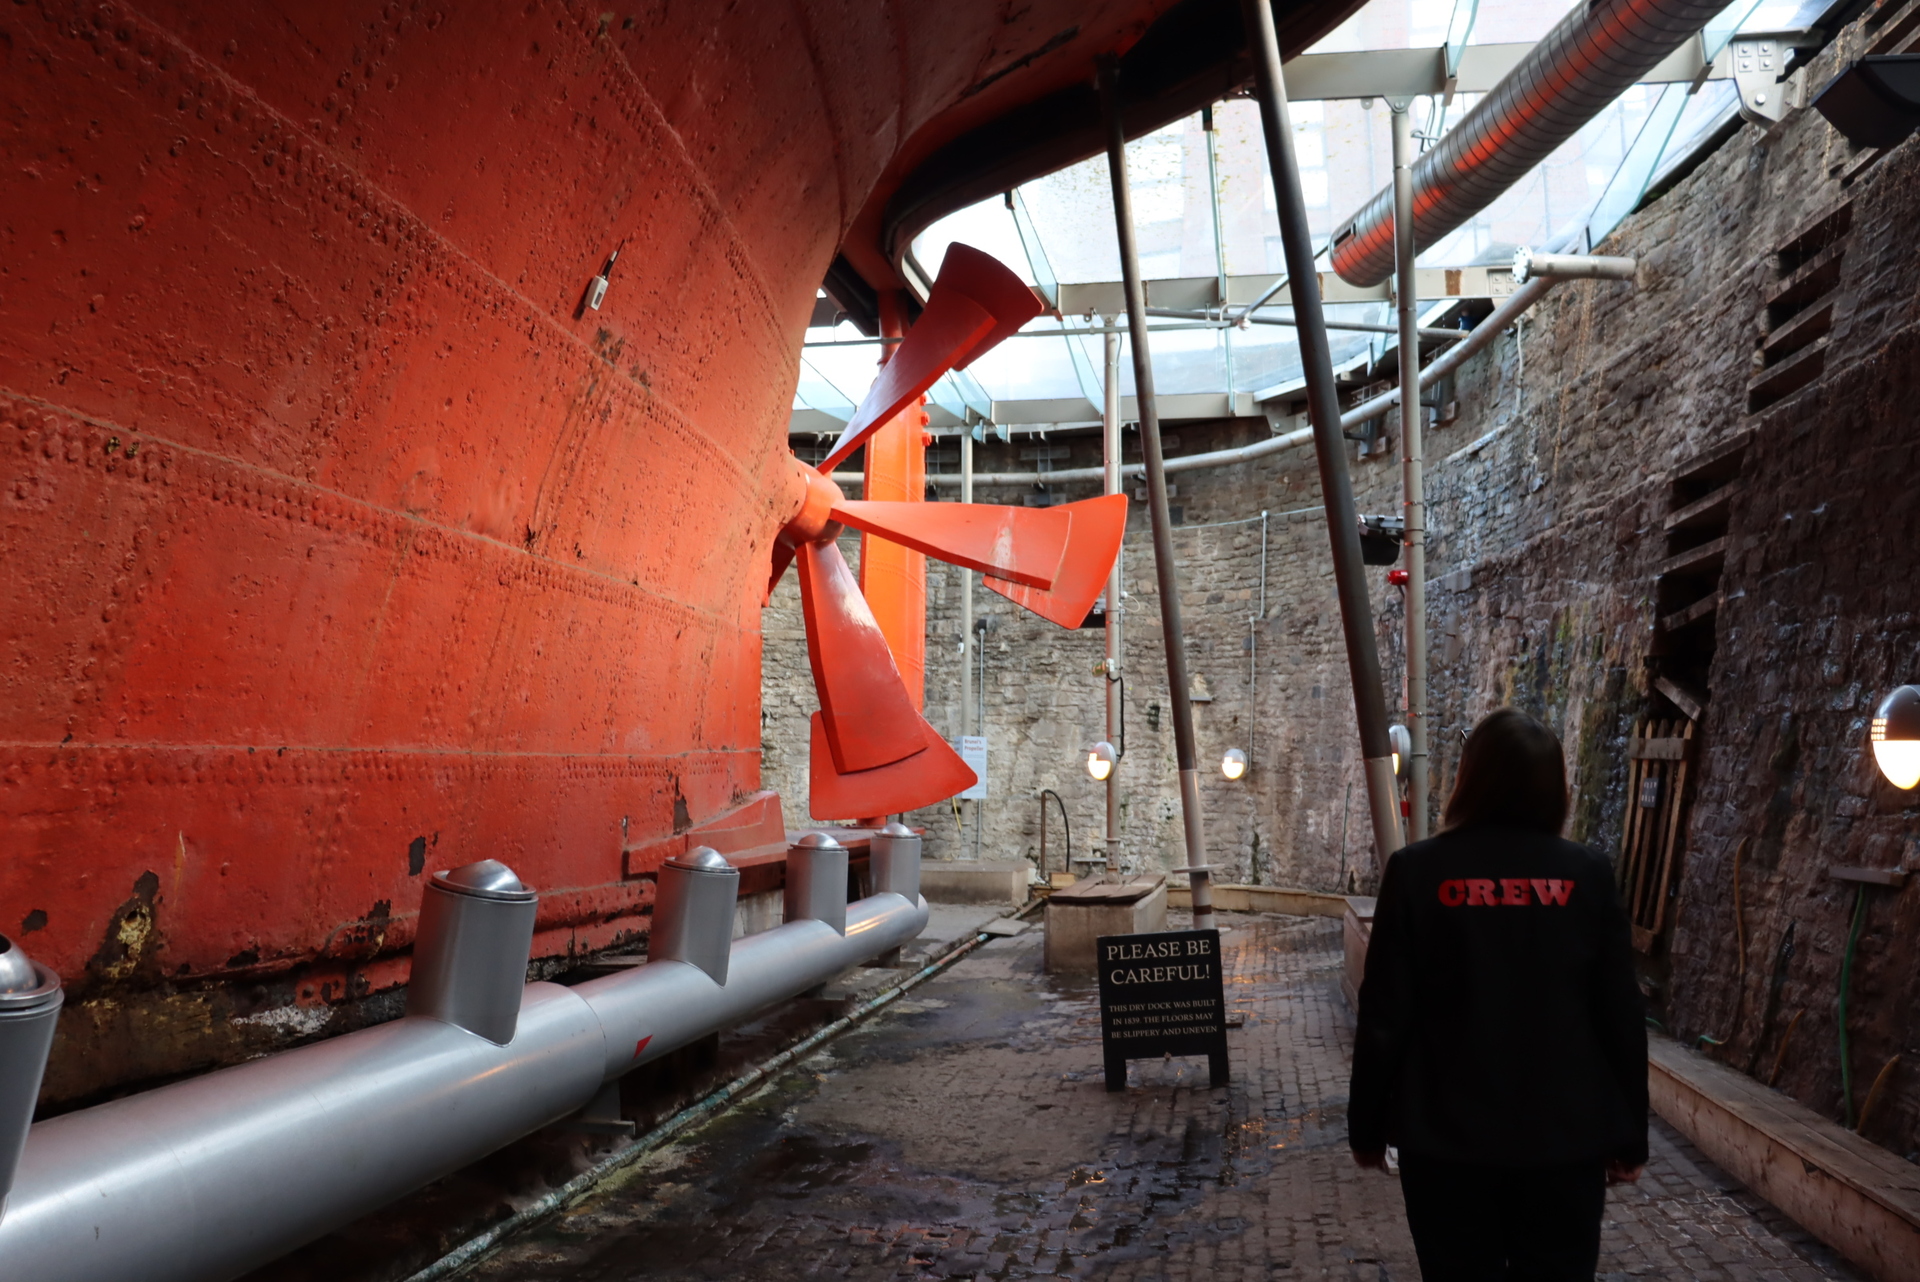 SS Great Britain and the pursuit of climate conscious conservation: 'The clever part is using what's already out there'